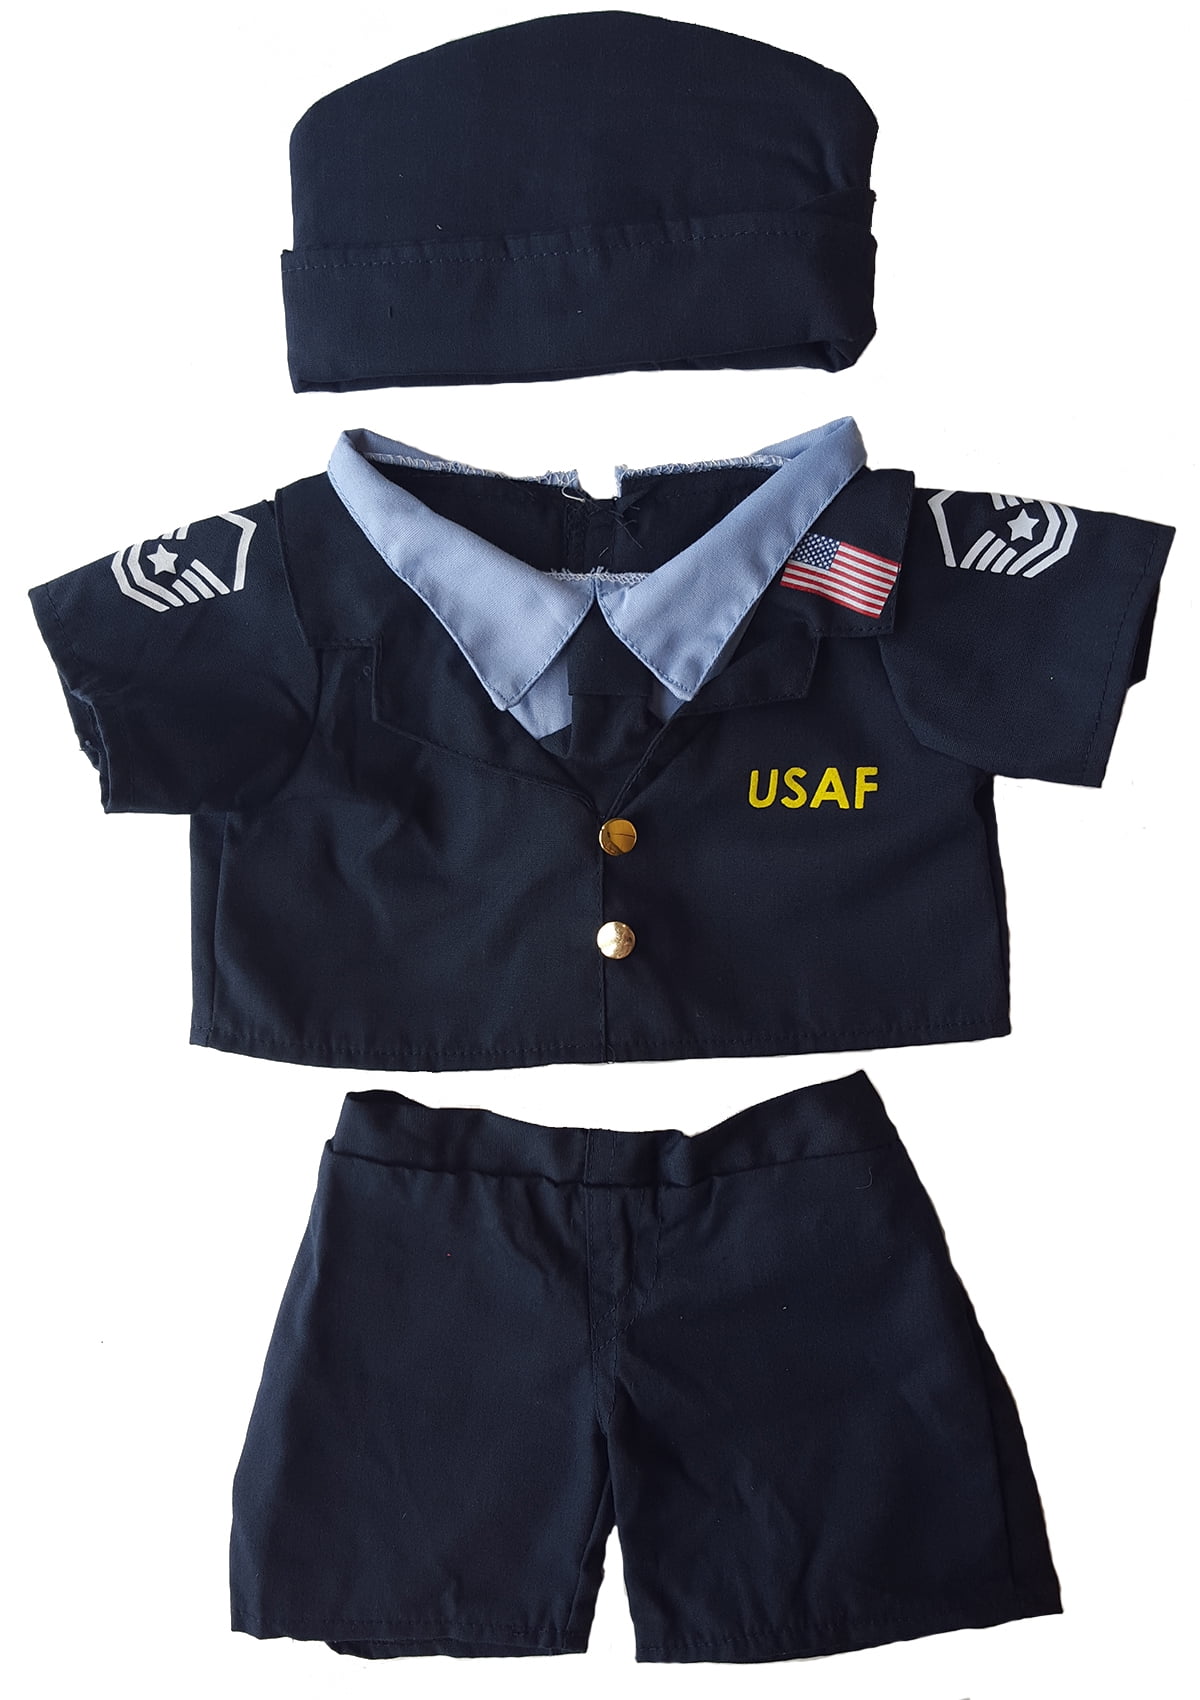 Canadian Police Officer Outfit Teddy Bear Clothes Fits Most 14-18 Build-a-bear and Make Your Own Stuffed Animals